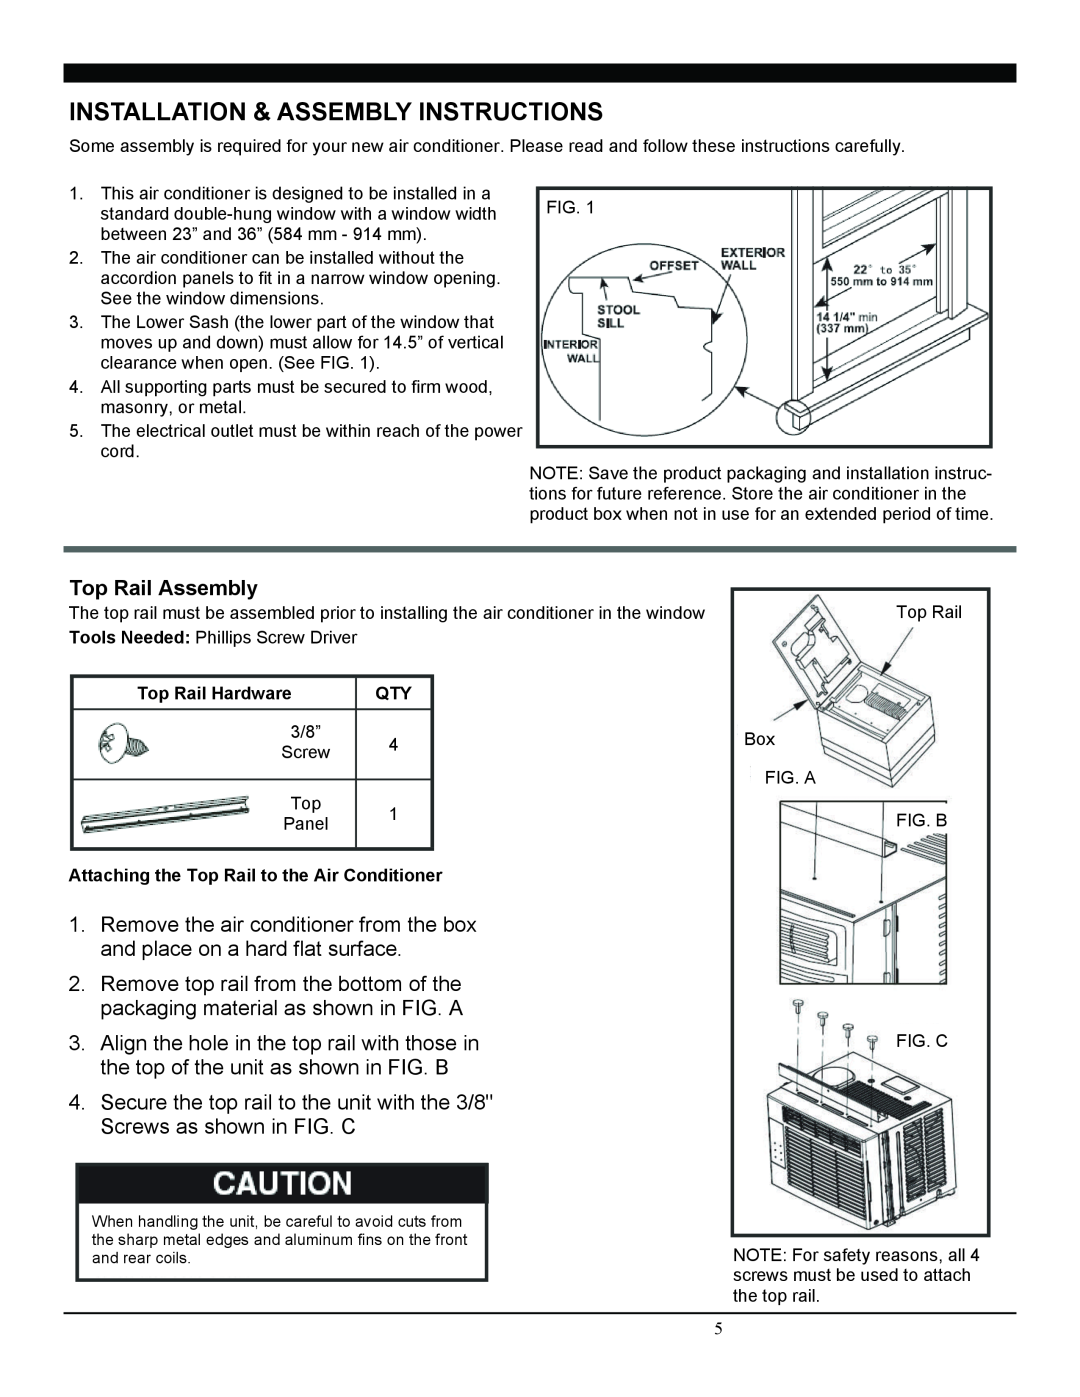 Soleus Air SG-WAC-05SM operating instructions Installation & Assembly Instructions, Top Rail Assembly 